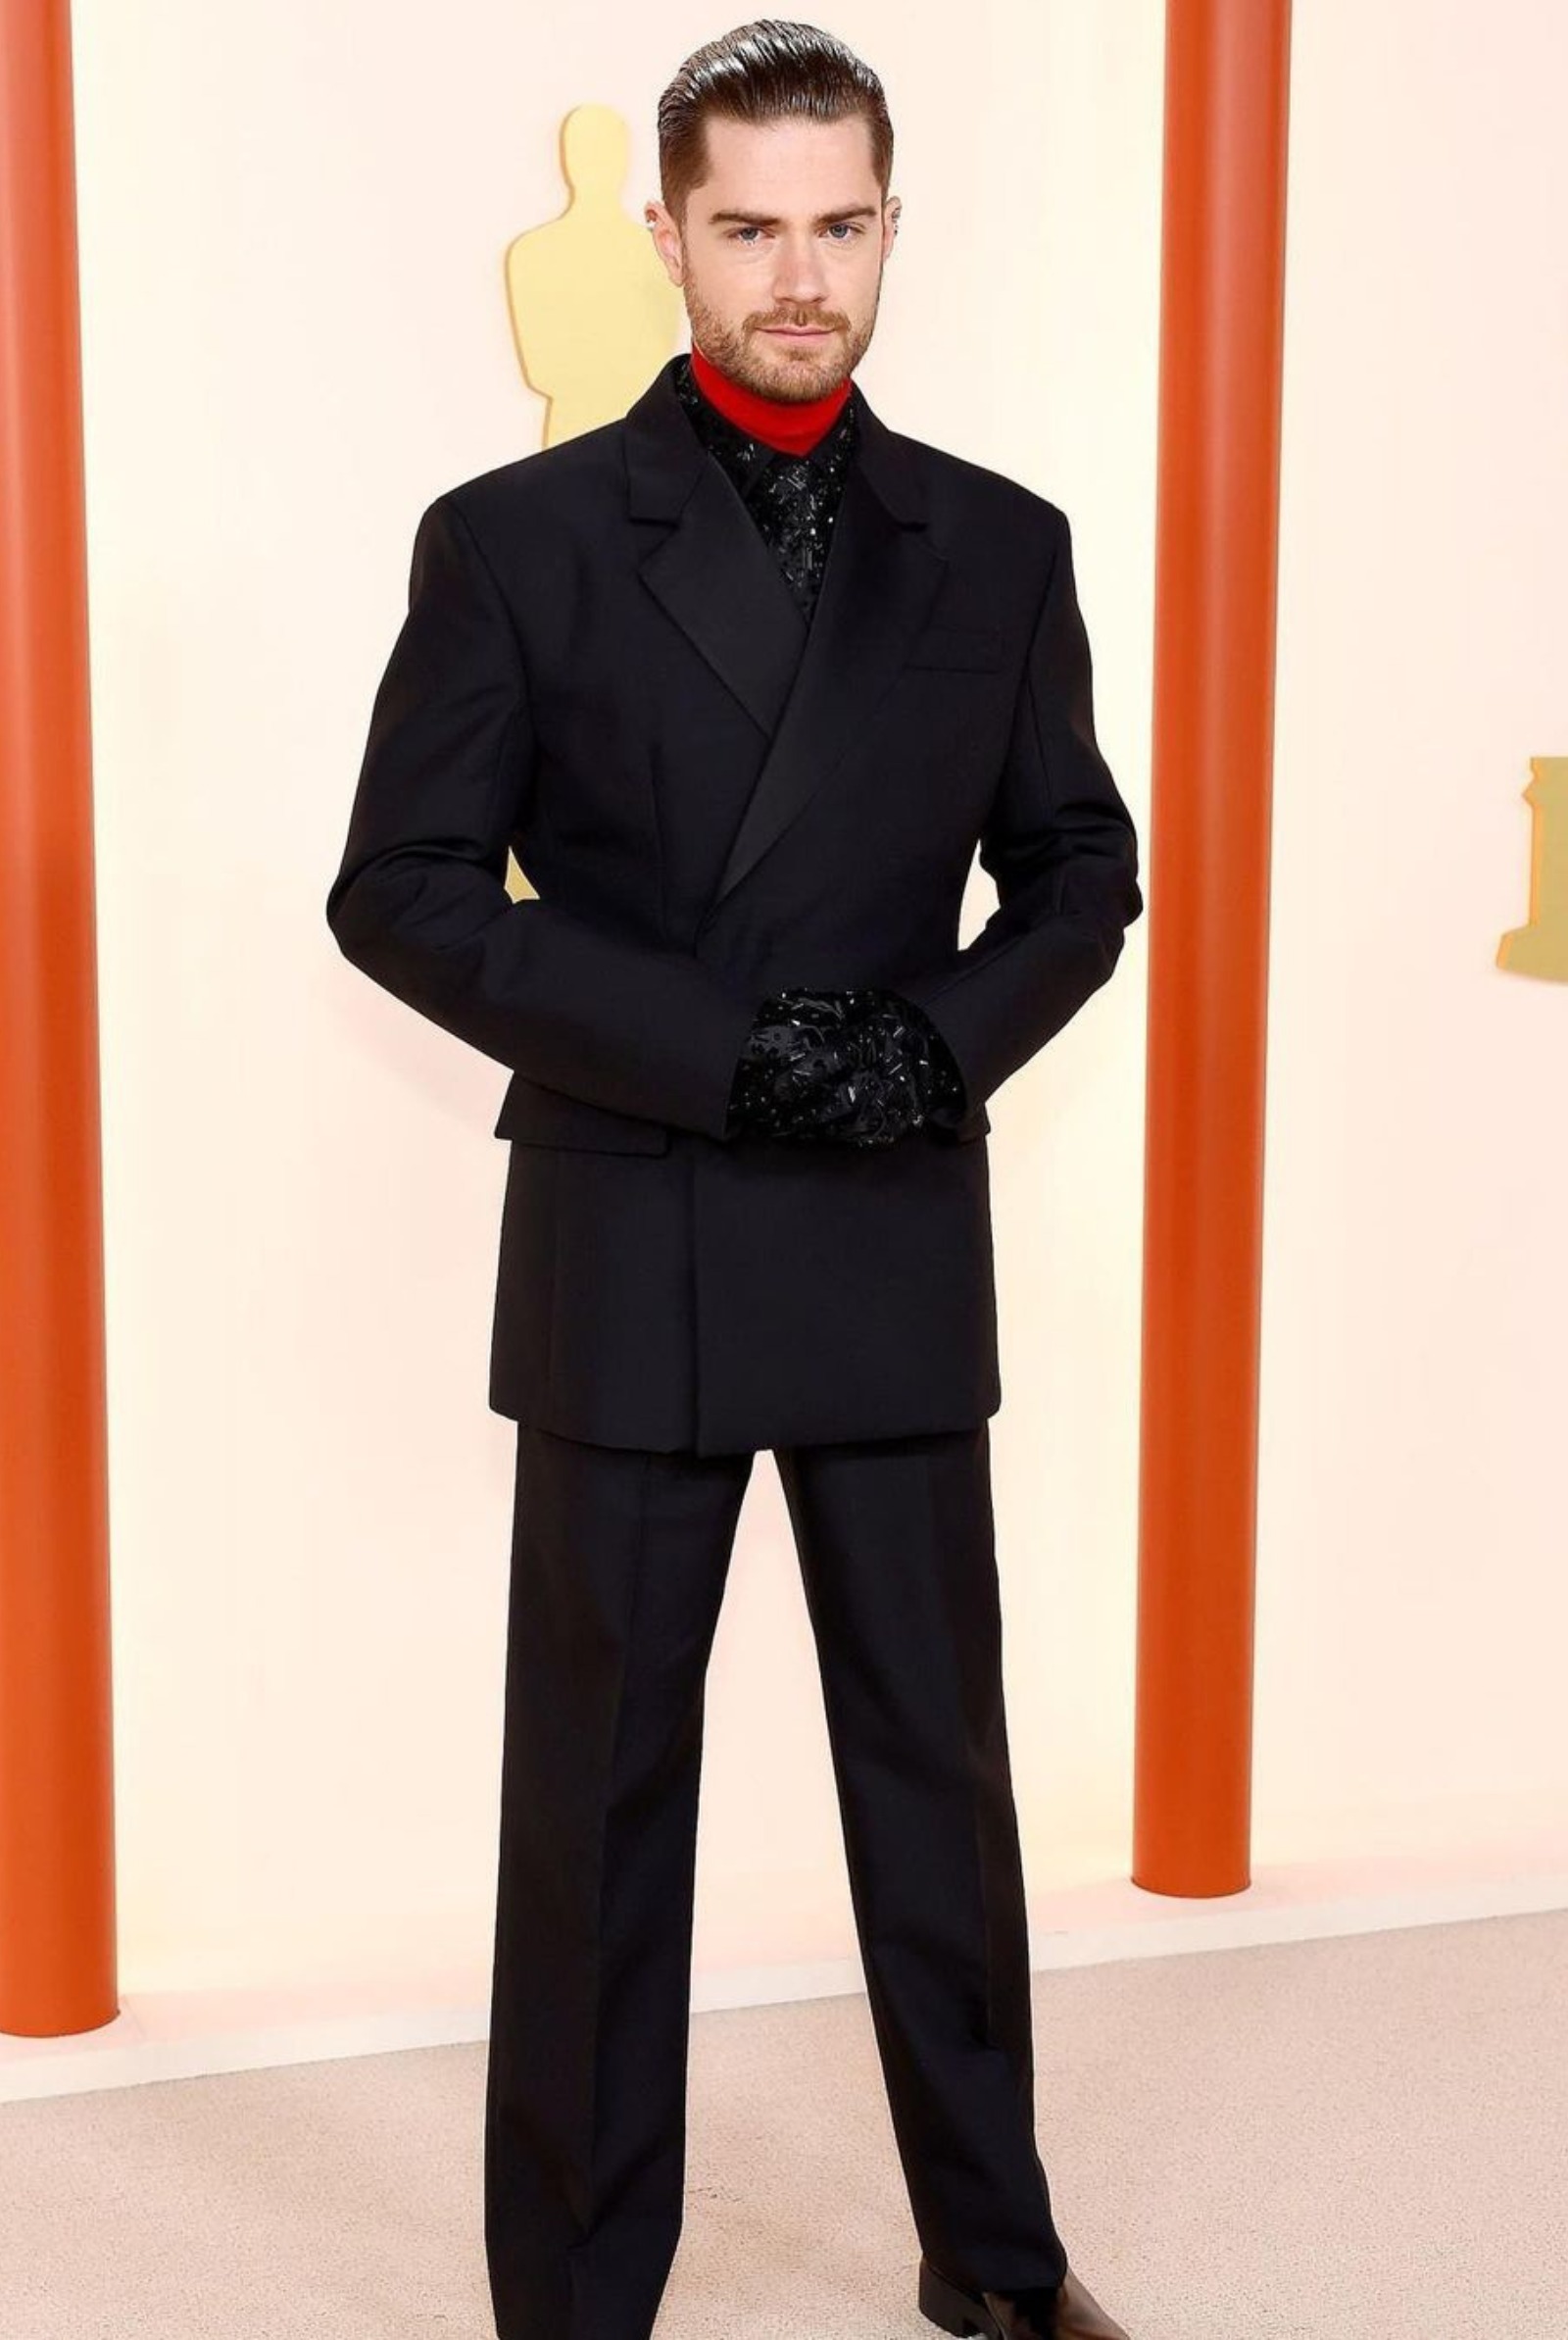 Lukas Dhont at Oscars 2023